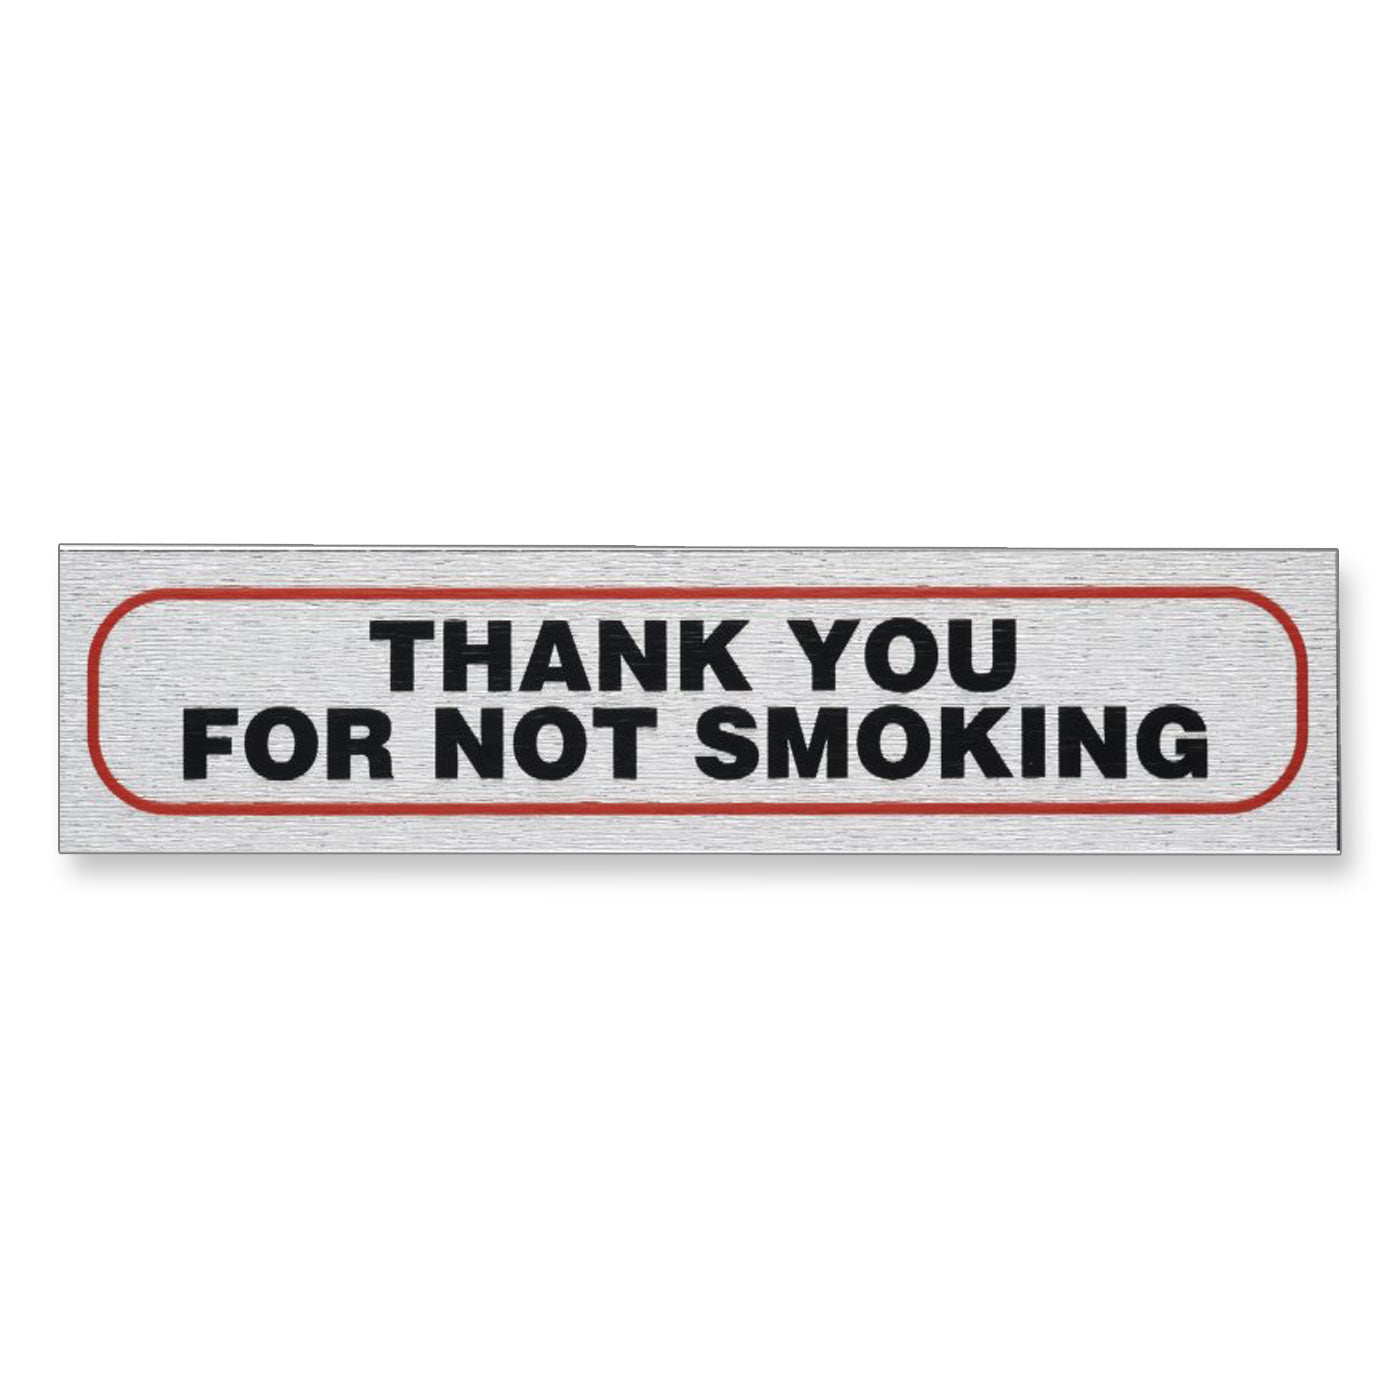 Self-Adhesive Information Sign "THANK YOU FOR NOT SMOKING"